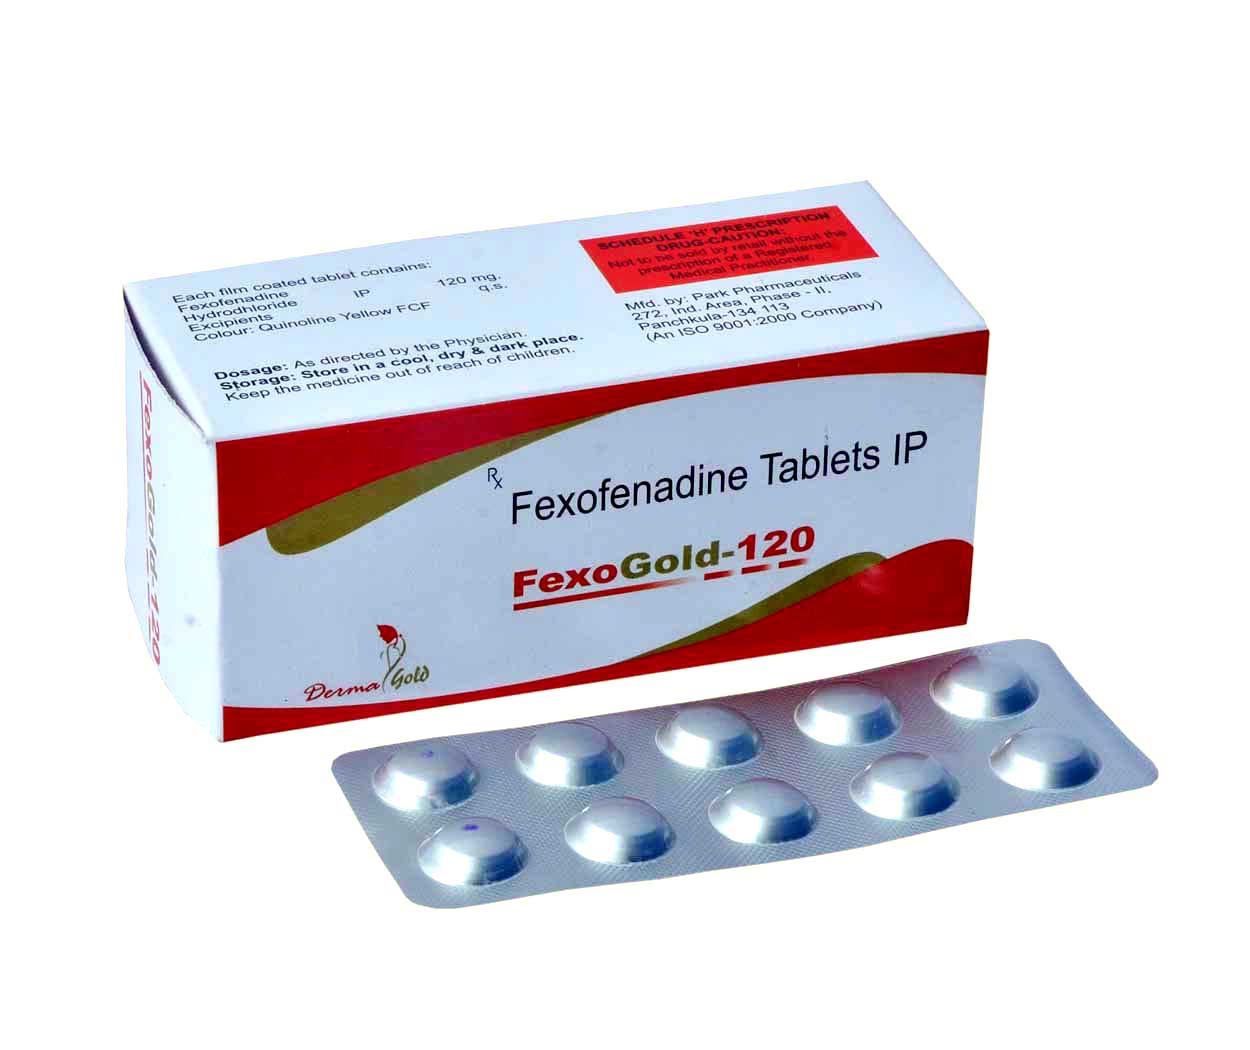 Product Name: FexoGold 120, Compositions of FexoGold 120 are Fexofenadine Tablets IP - Park Pharmaceuticals